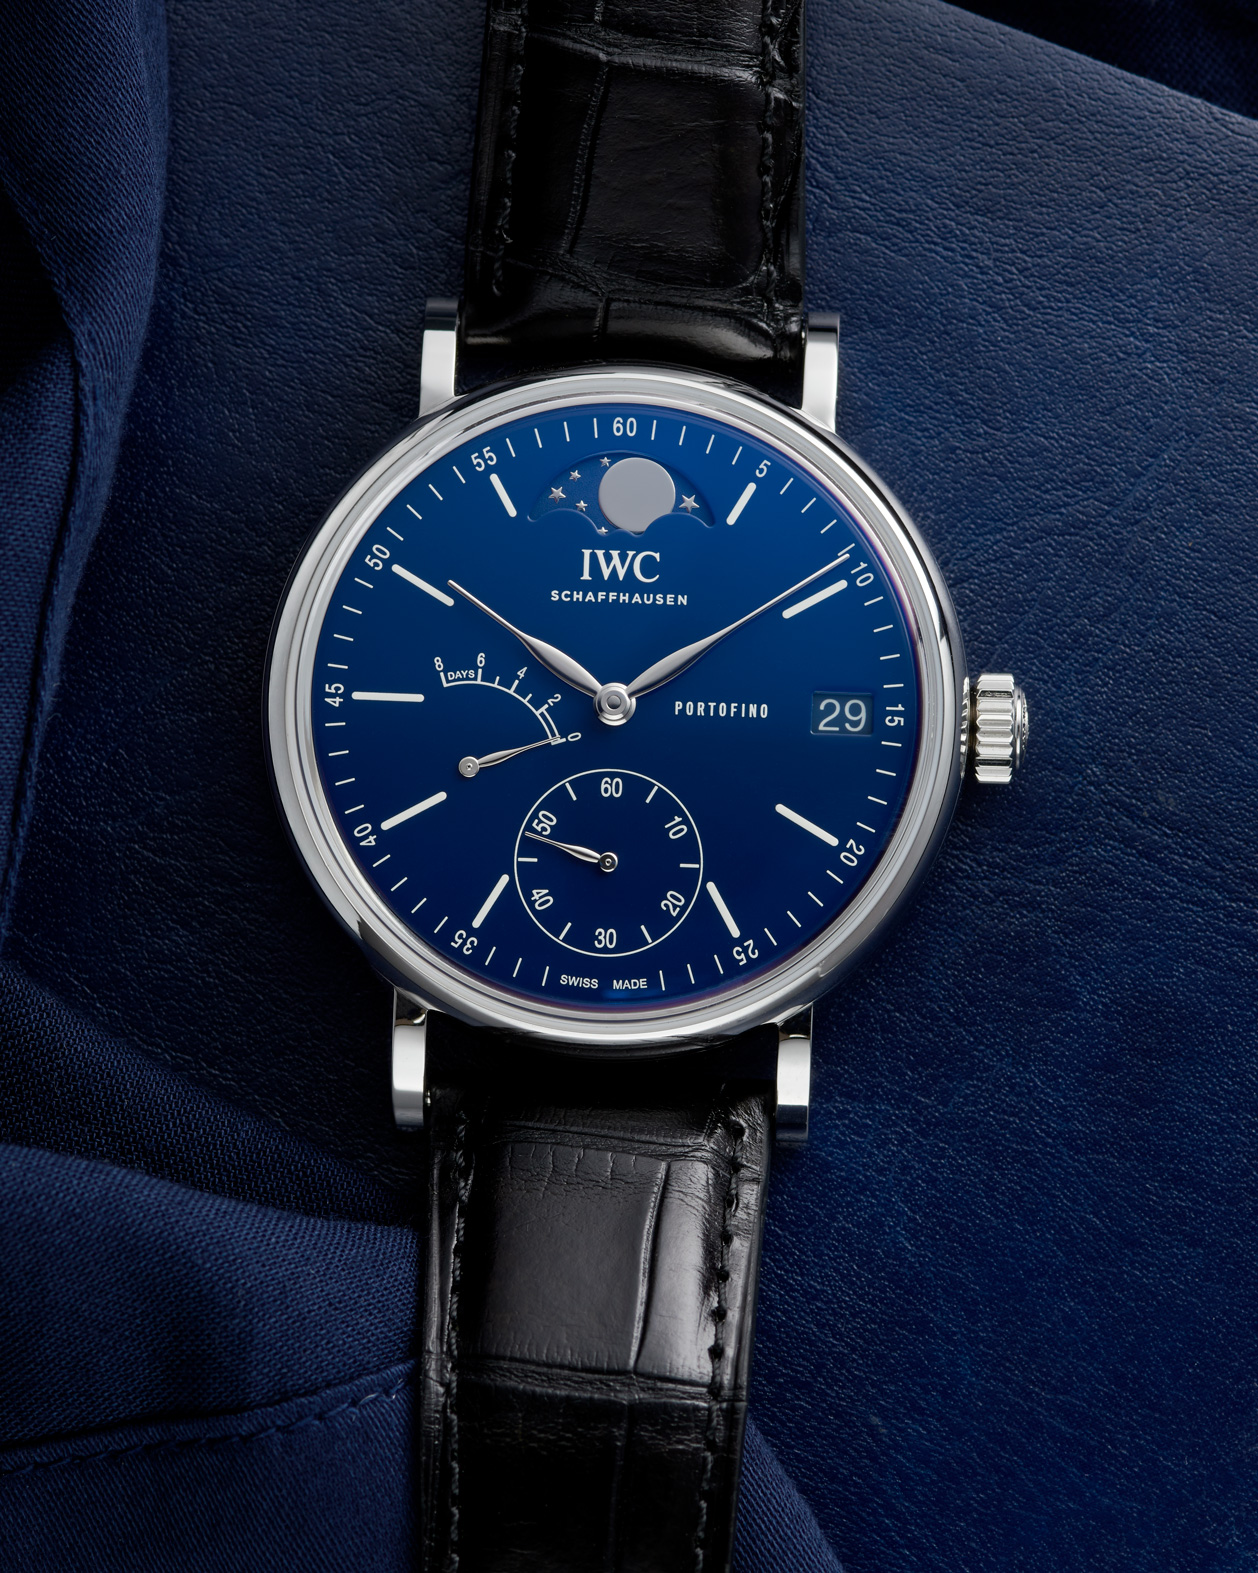 IWC Blue on a blue notepad